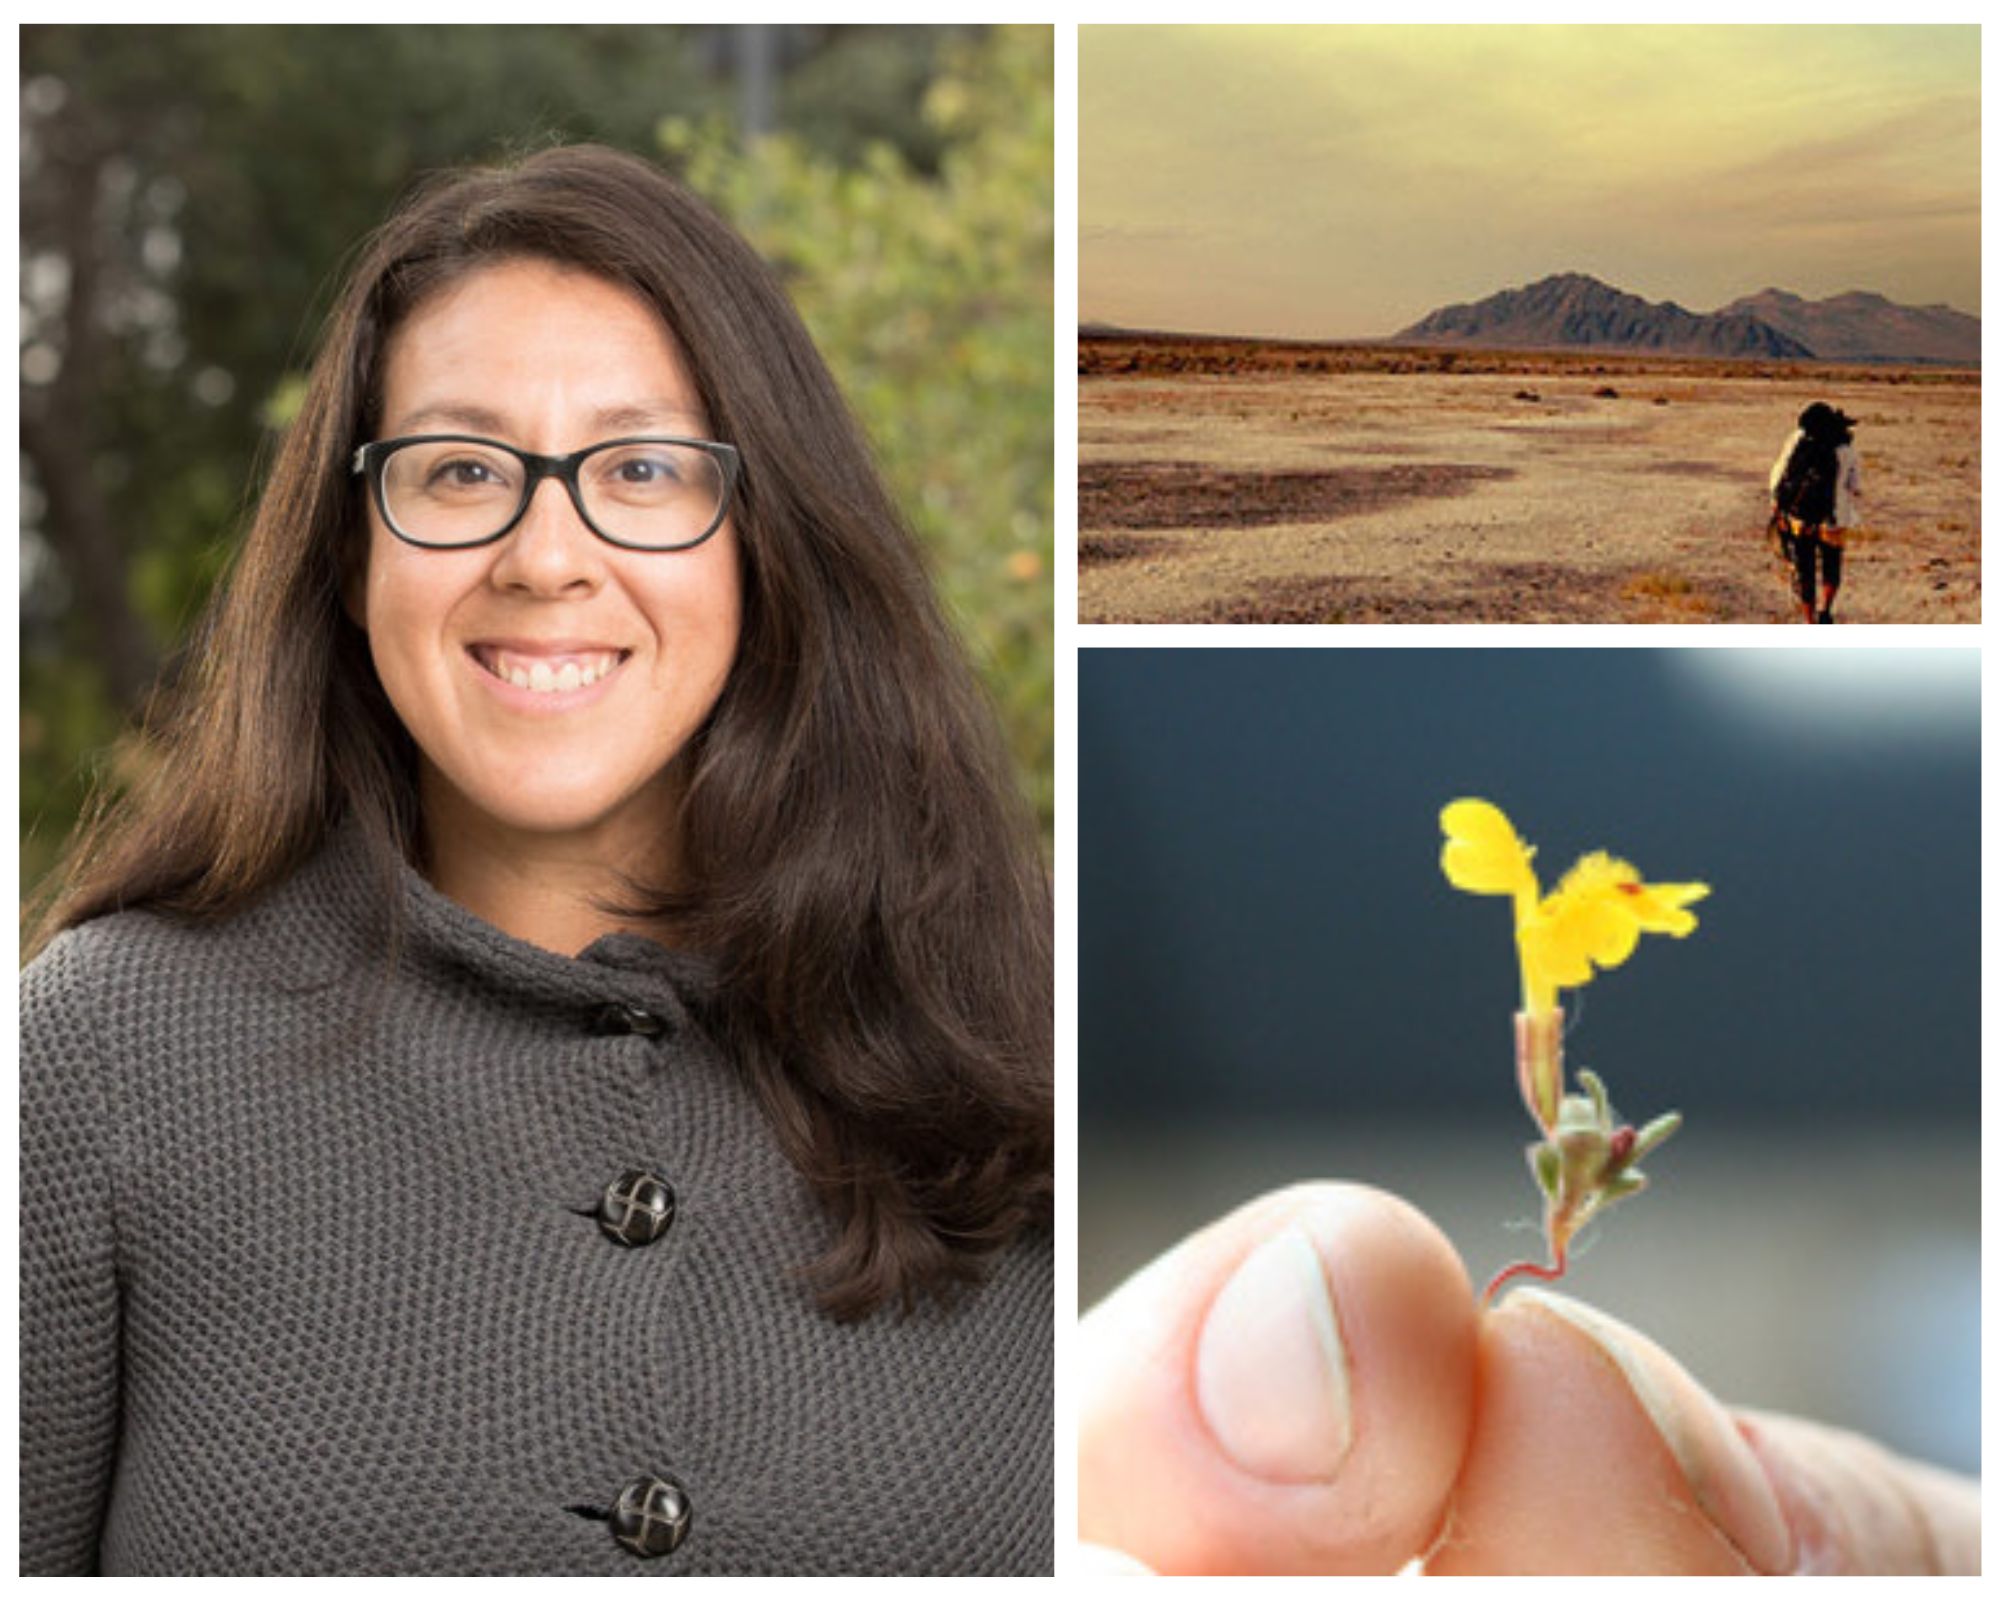 Collage including a portrait of Naomi Fraga, a landscape photo of Naomi hiking in the Amargosa Desert, a macro photo showing fingers holding a small yellow flower of the family Phrymaceae